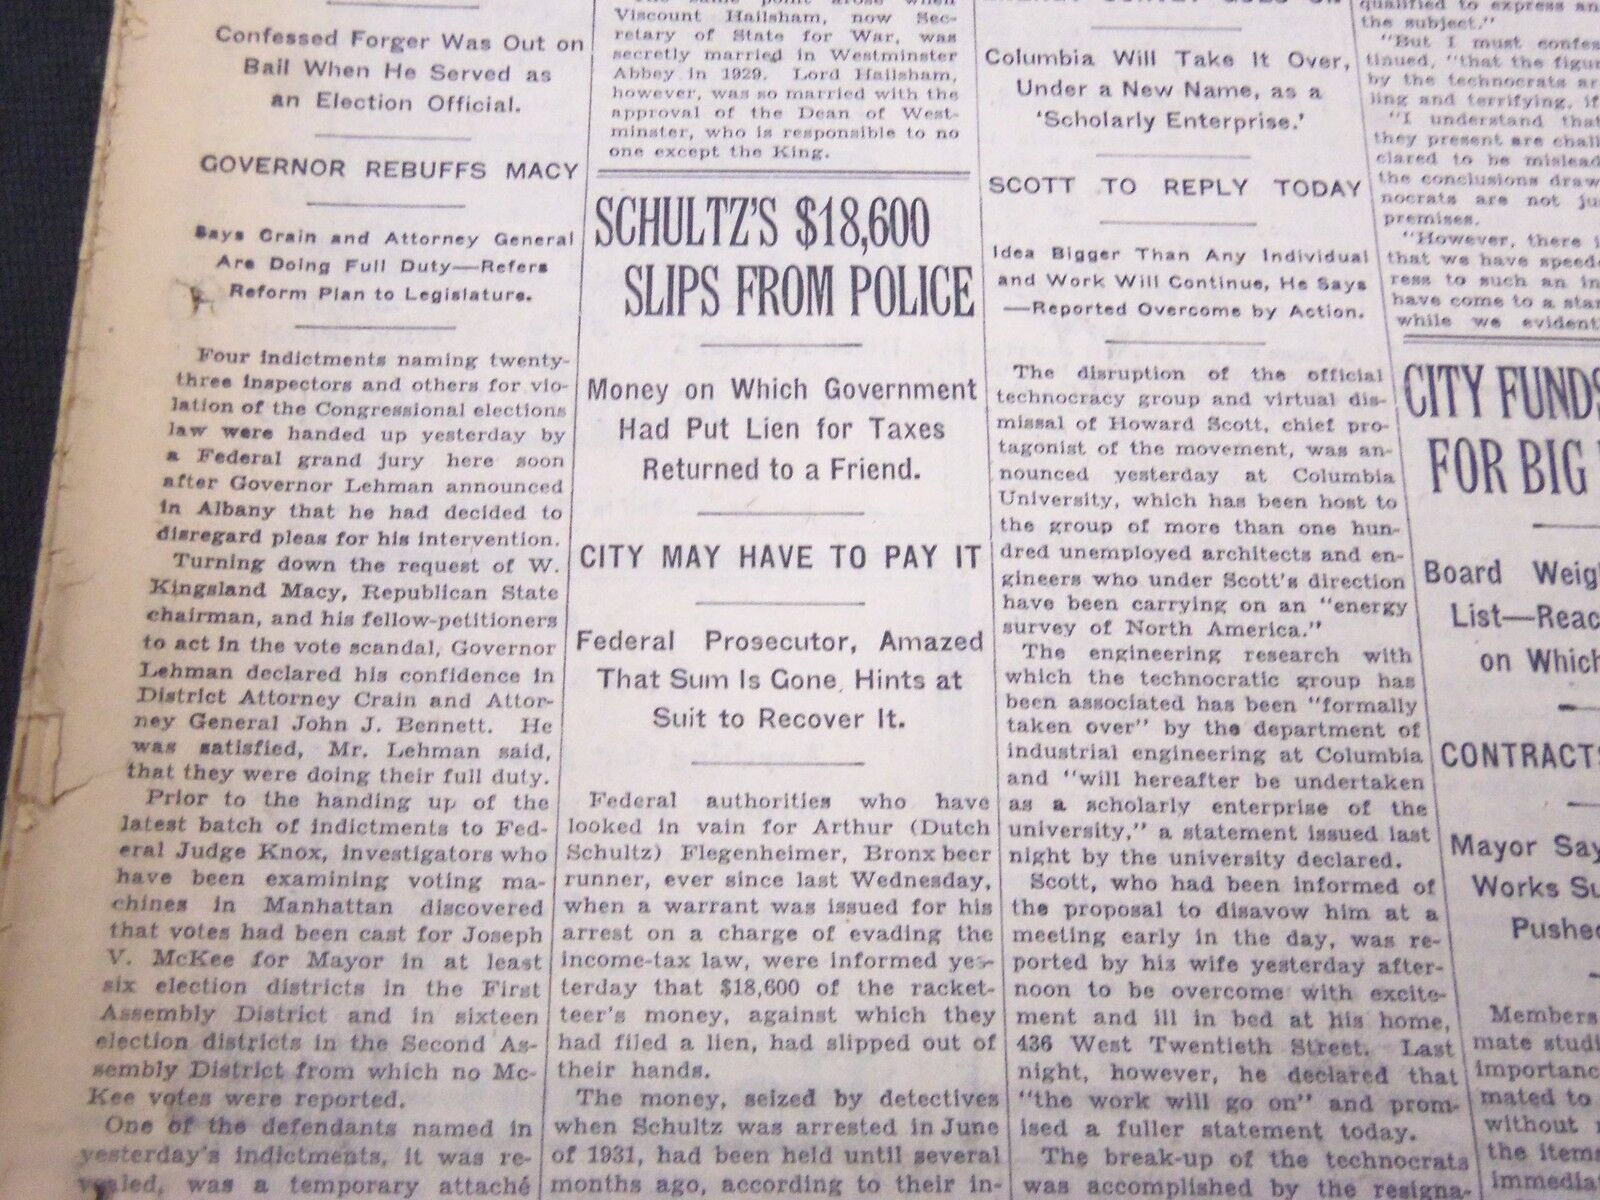 1933 JANUARY 24 NEW YORK TIMES - SCHULTZ'S $18,600 SHIPS FROM POLICE - NT 5198